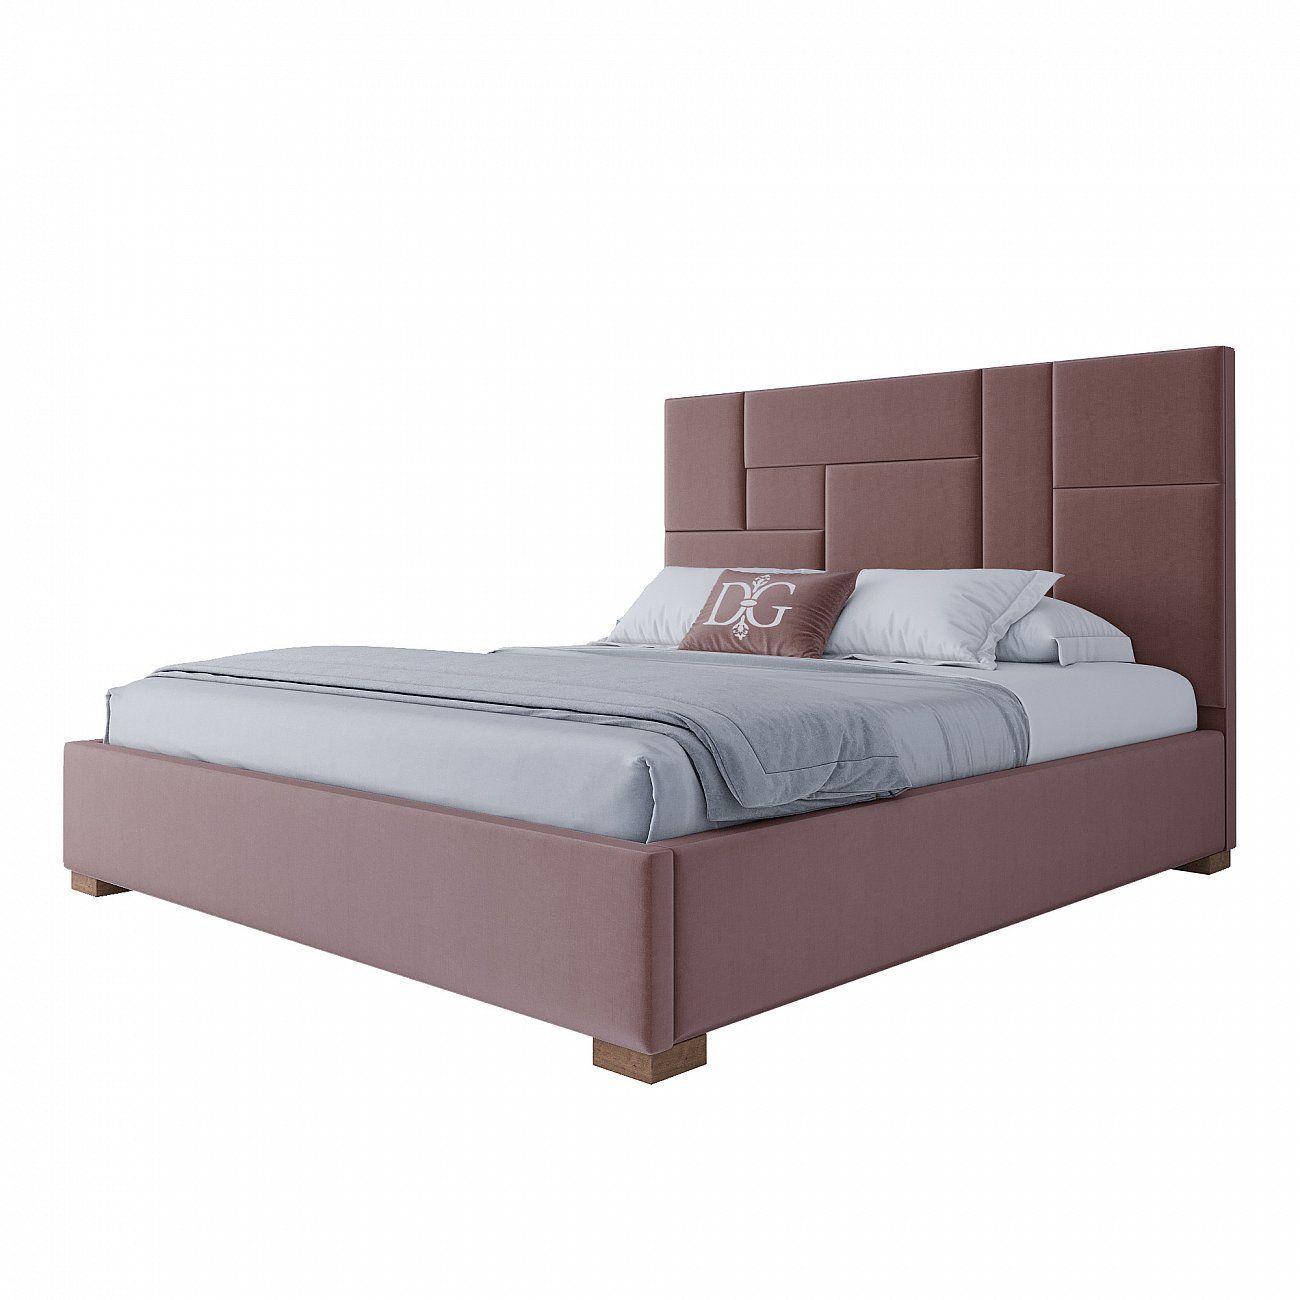 Double bed with upholstered headboard 180x200 cm pink Wax